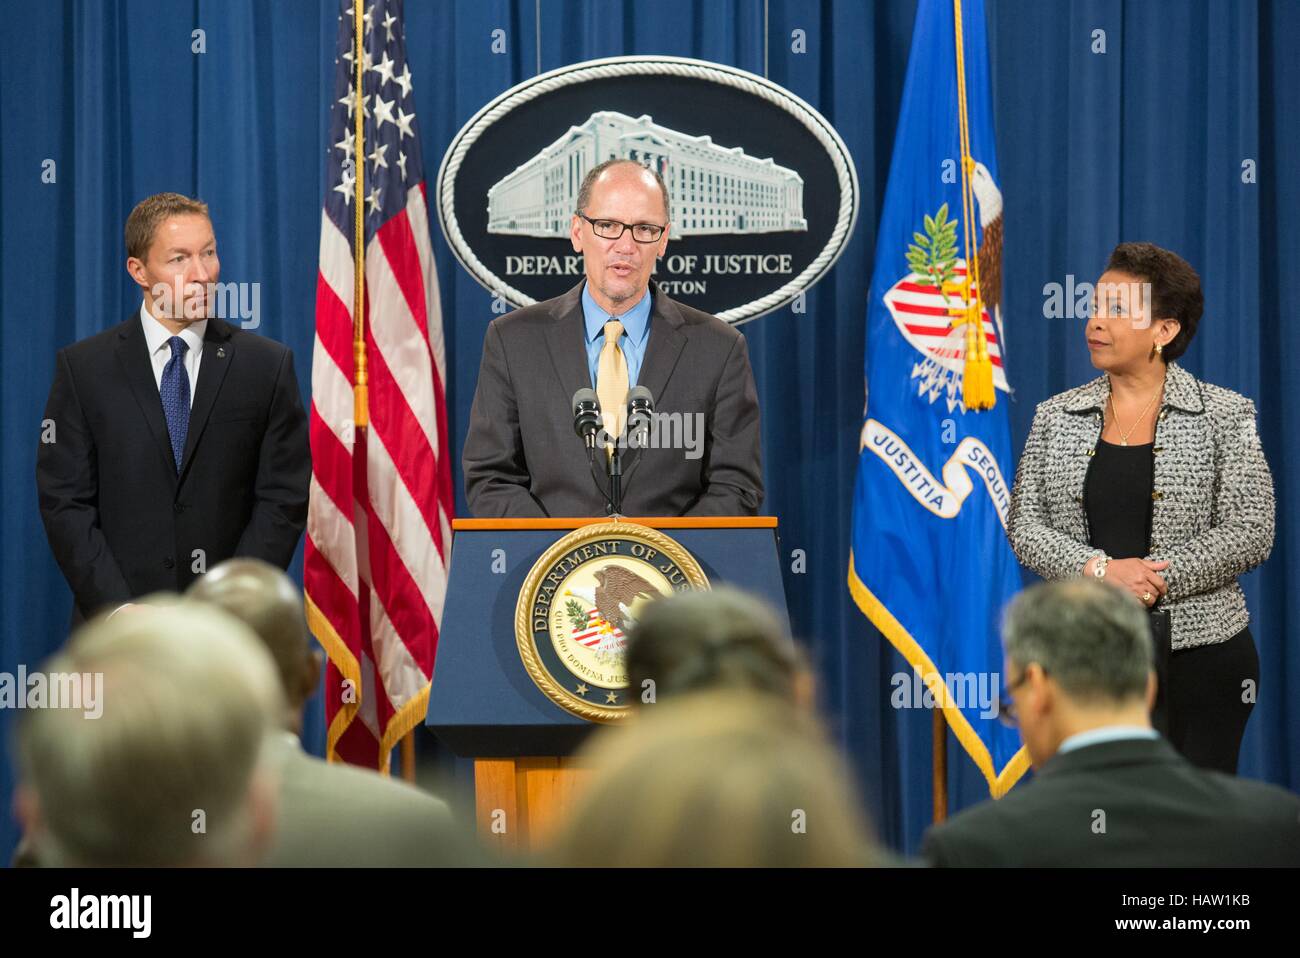 U.S. Department of Homeland Security Immigration and Customs Enforcement Deputy Director Daniel Ragsdale (left), Secretary of Labor Thomas Perez (middle), and Attorney General Loretta Lynch hold a press conference to discuss combating human trafficking at the Department of Justice June 25, 2015 in Washington, DC. Stock Photo